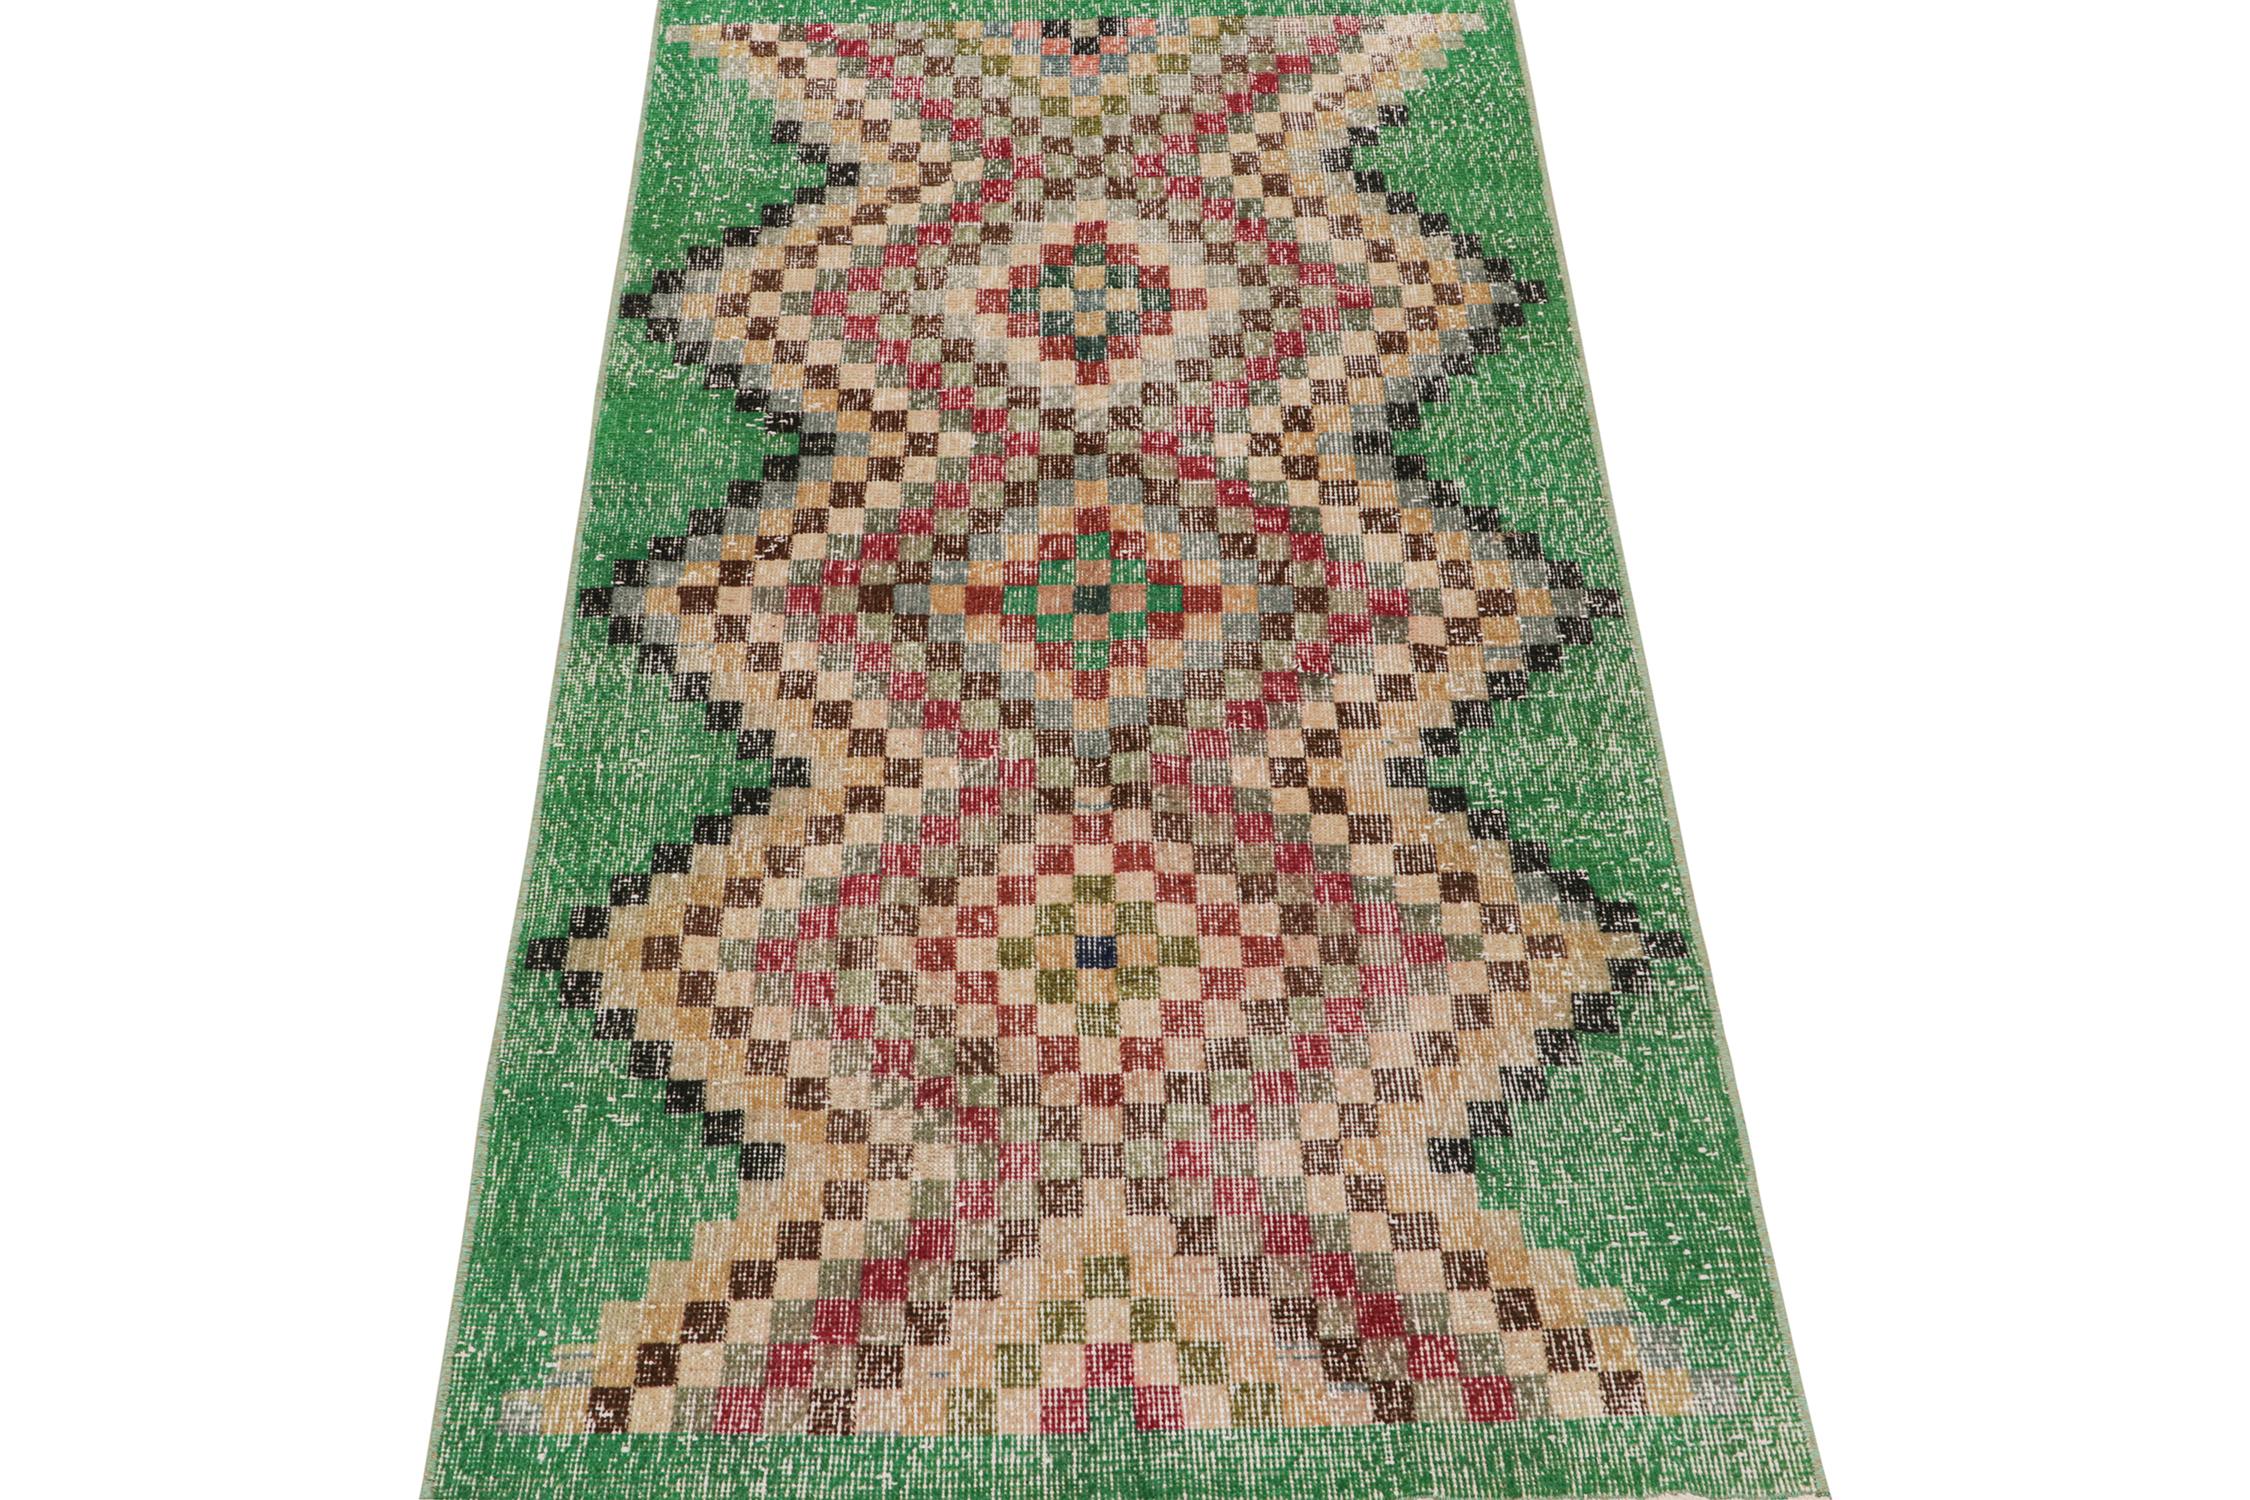 This vintage 3x7 runner is a new addition to Rug & Kilim’s Mid-Century Pasha Collection. This line is a commemoration, with rare curations we believe to hail from multidisciplinary Turkish designer Zeki Müren. 

Further on the Design:

This